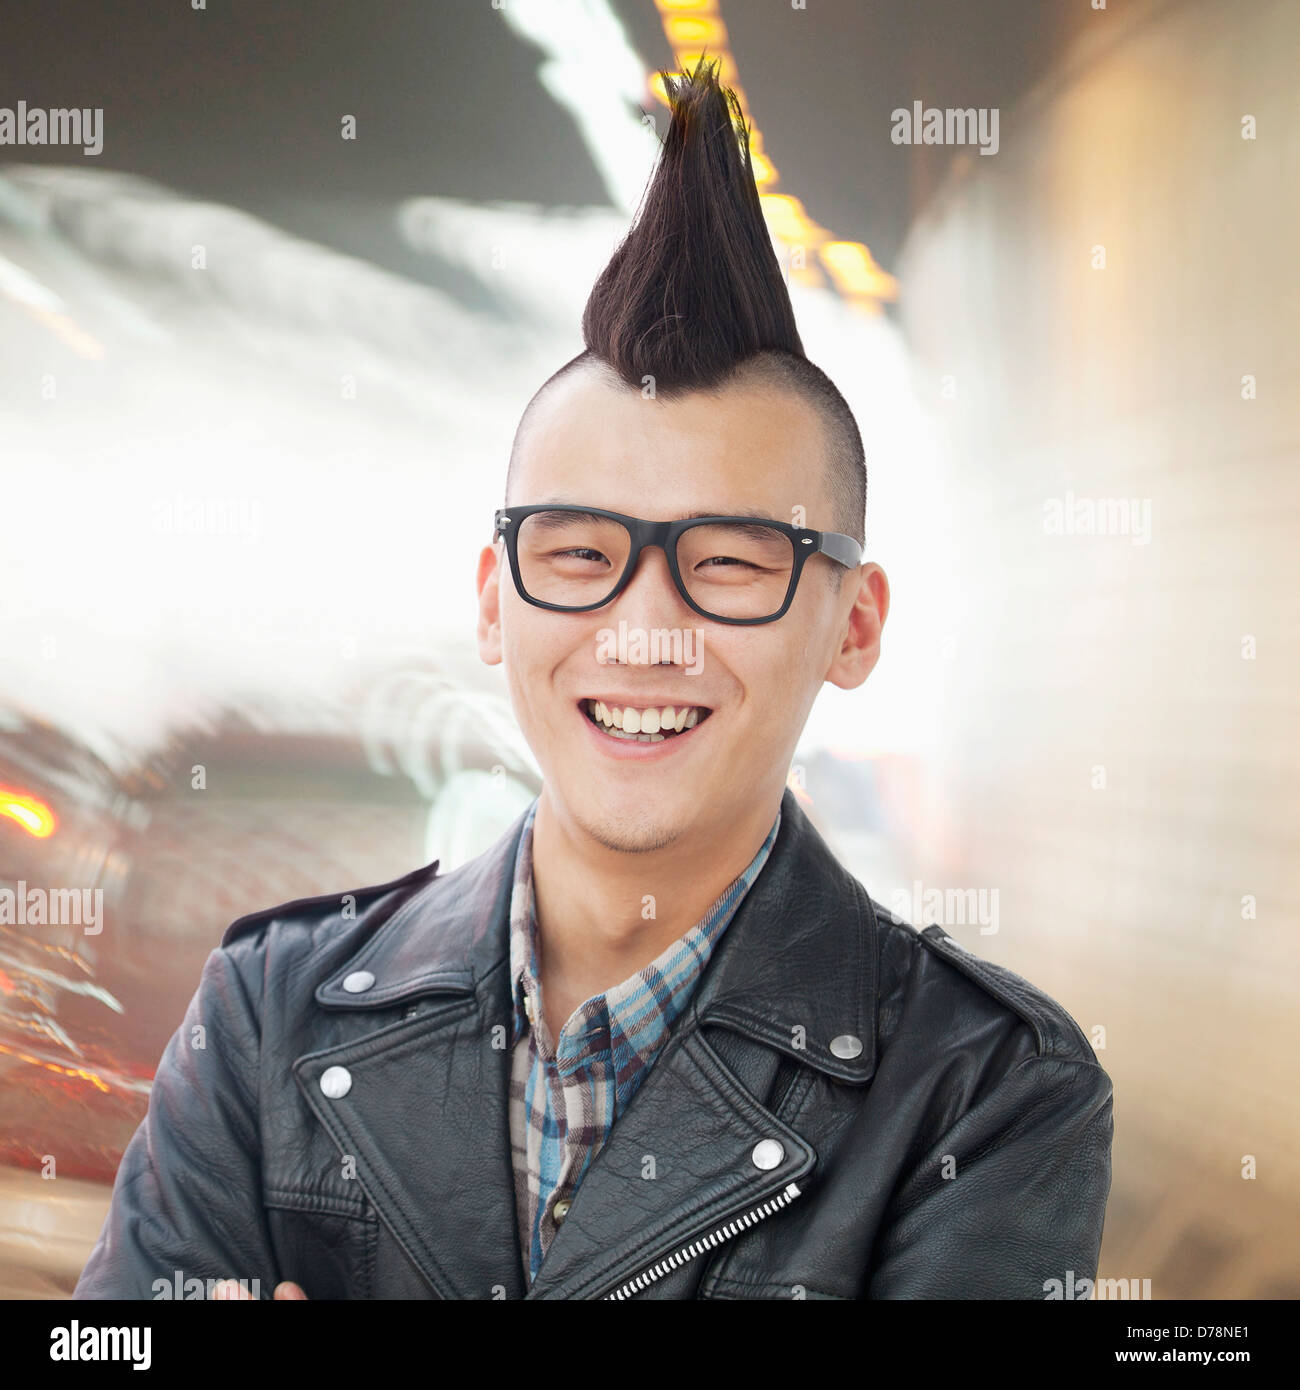 Young man with punk Mohawk smiling Stock Photo